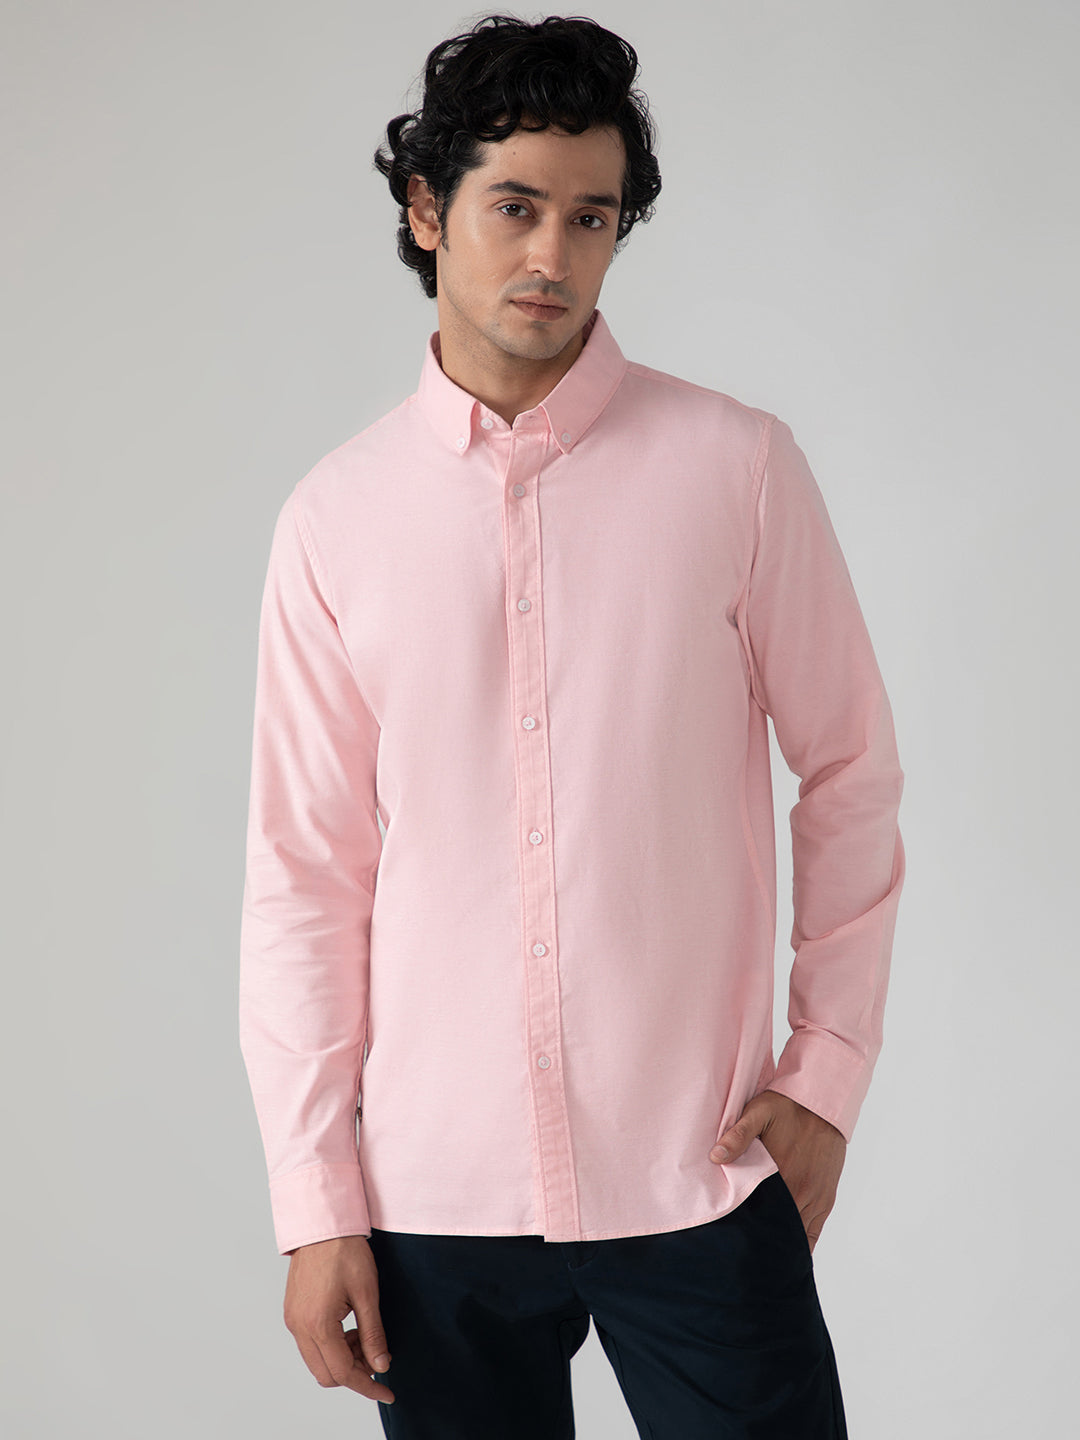 2 Way Stretch Oxford Shirt in Salmon Pink- Slim Fit